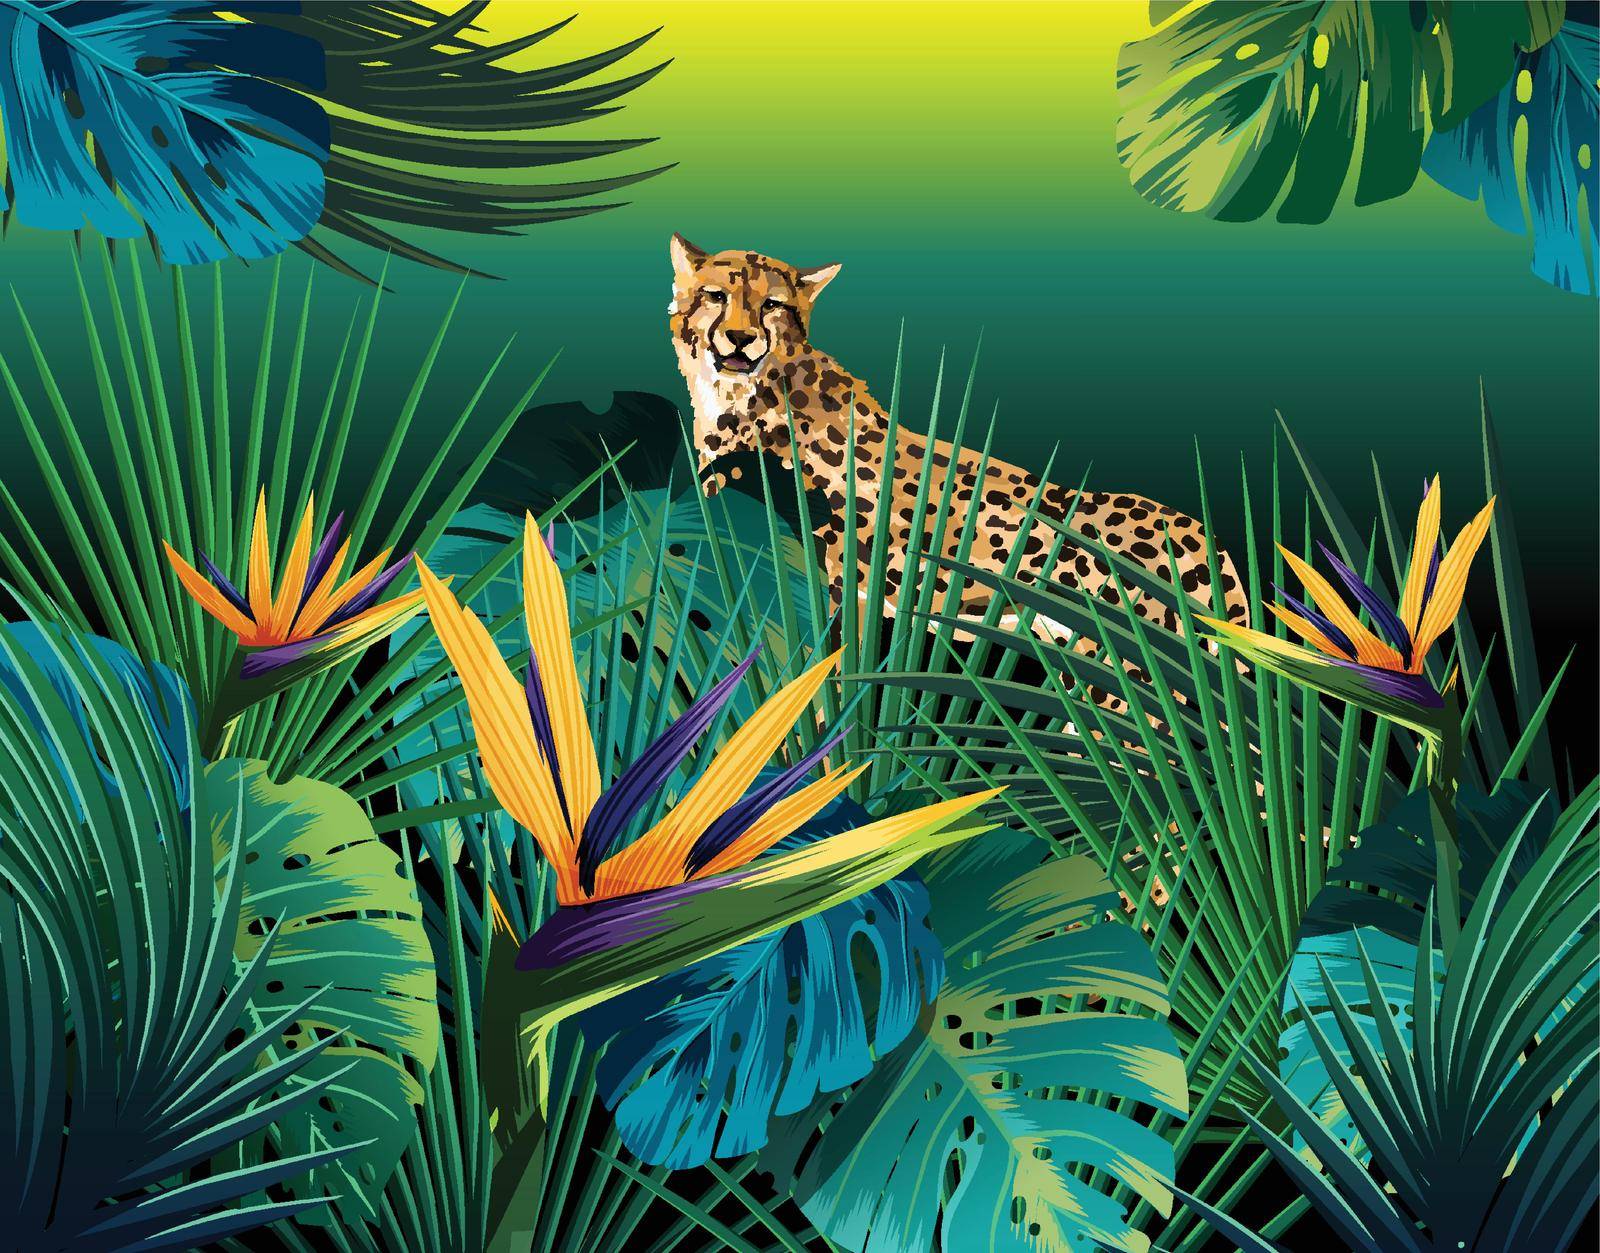 you can use leopard in tropical background to design banners, posters, backgrounds, ...etc.